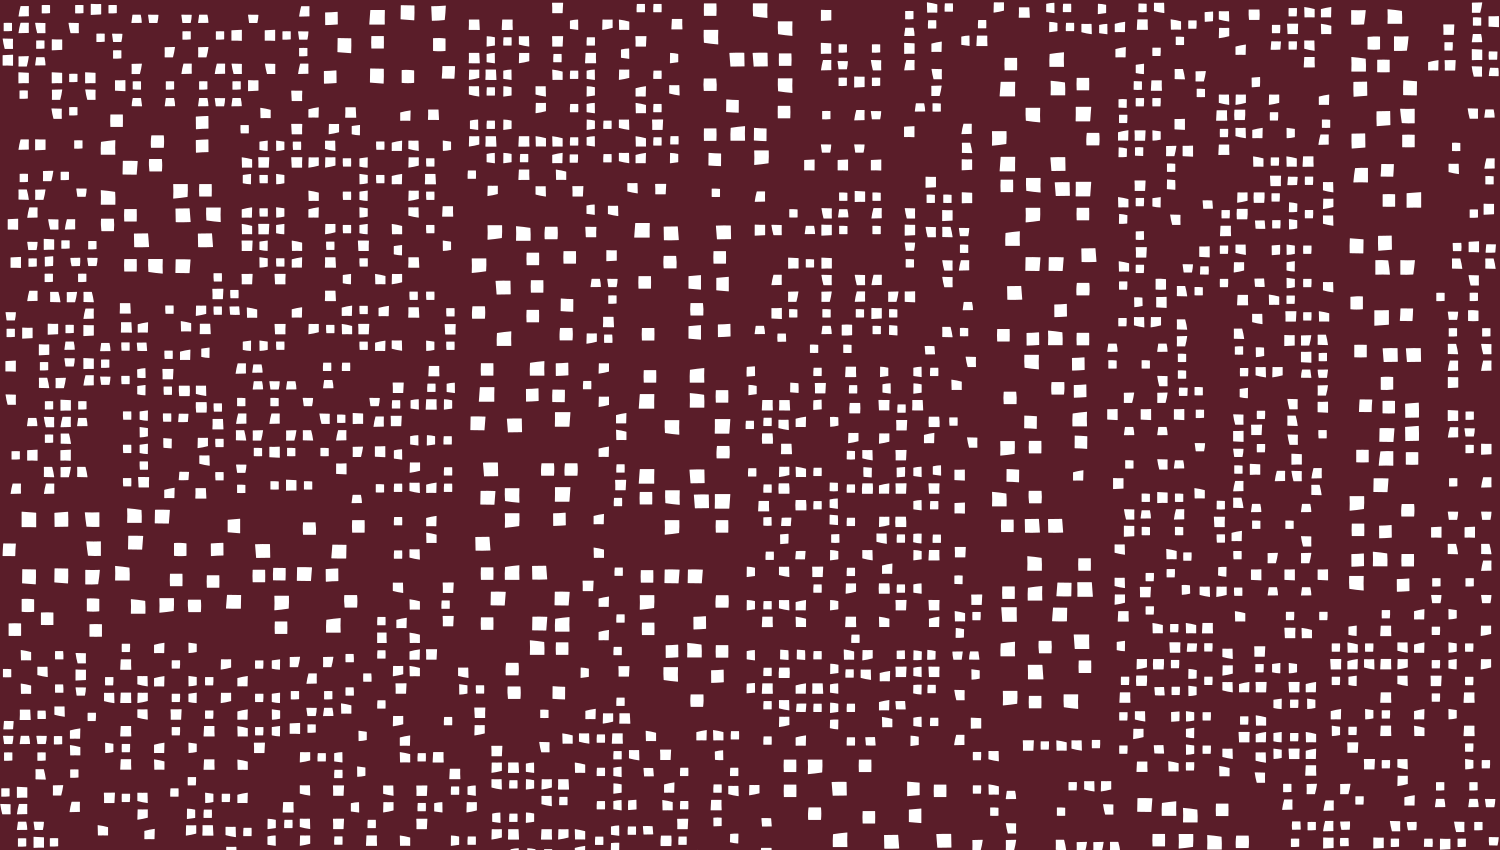 Parasoleil™ Gotham© pattern displayed with a burgundy color overlay